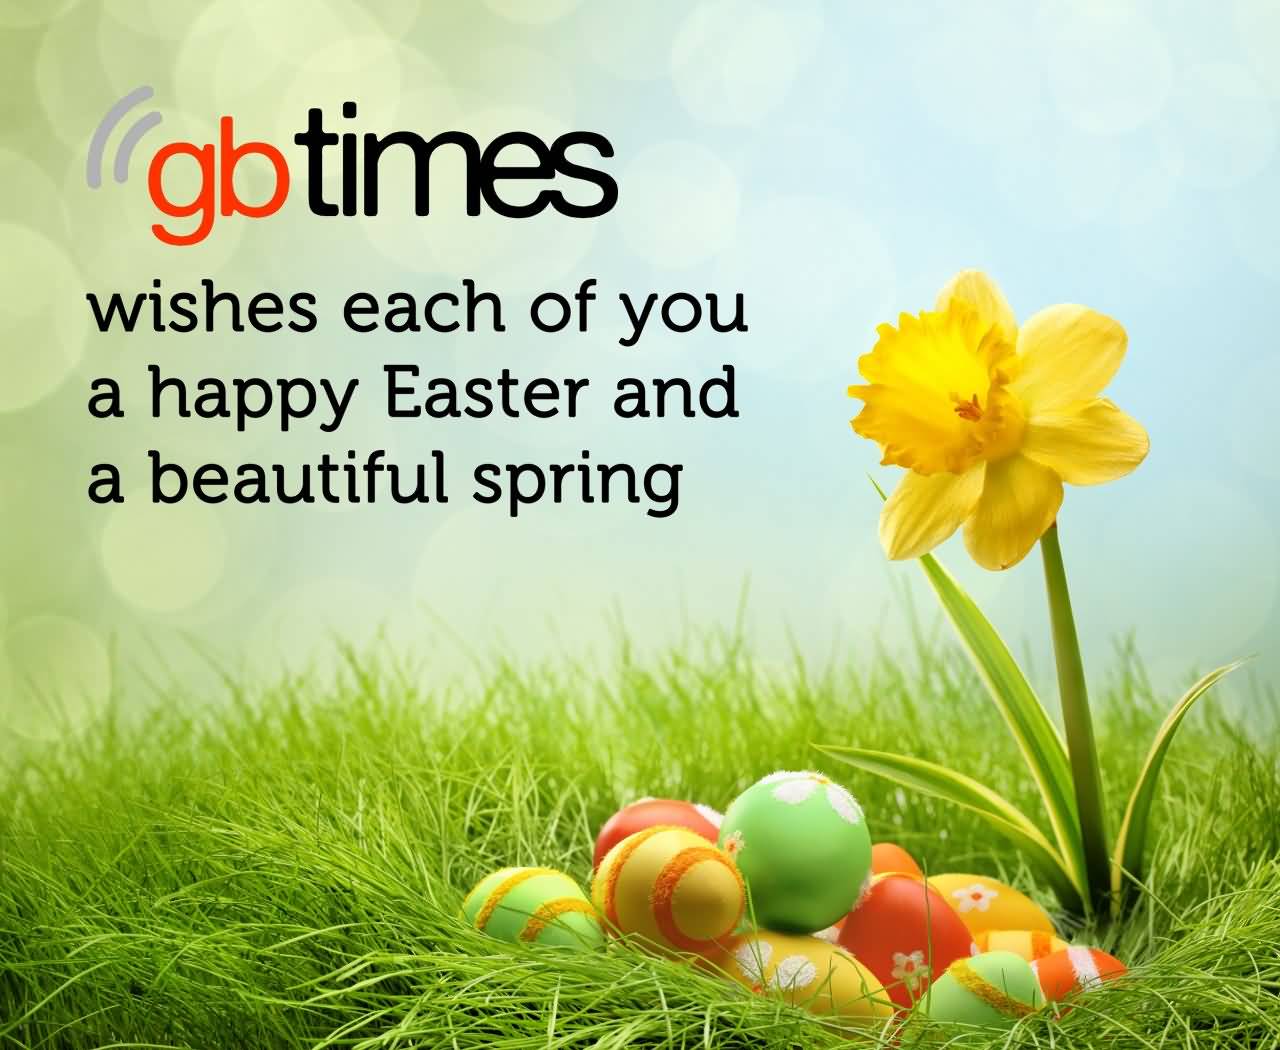 Wishes Each Of You A Happy Easter And A Beautiful Spring